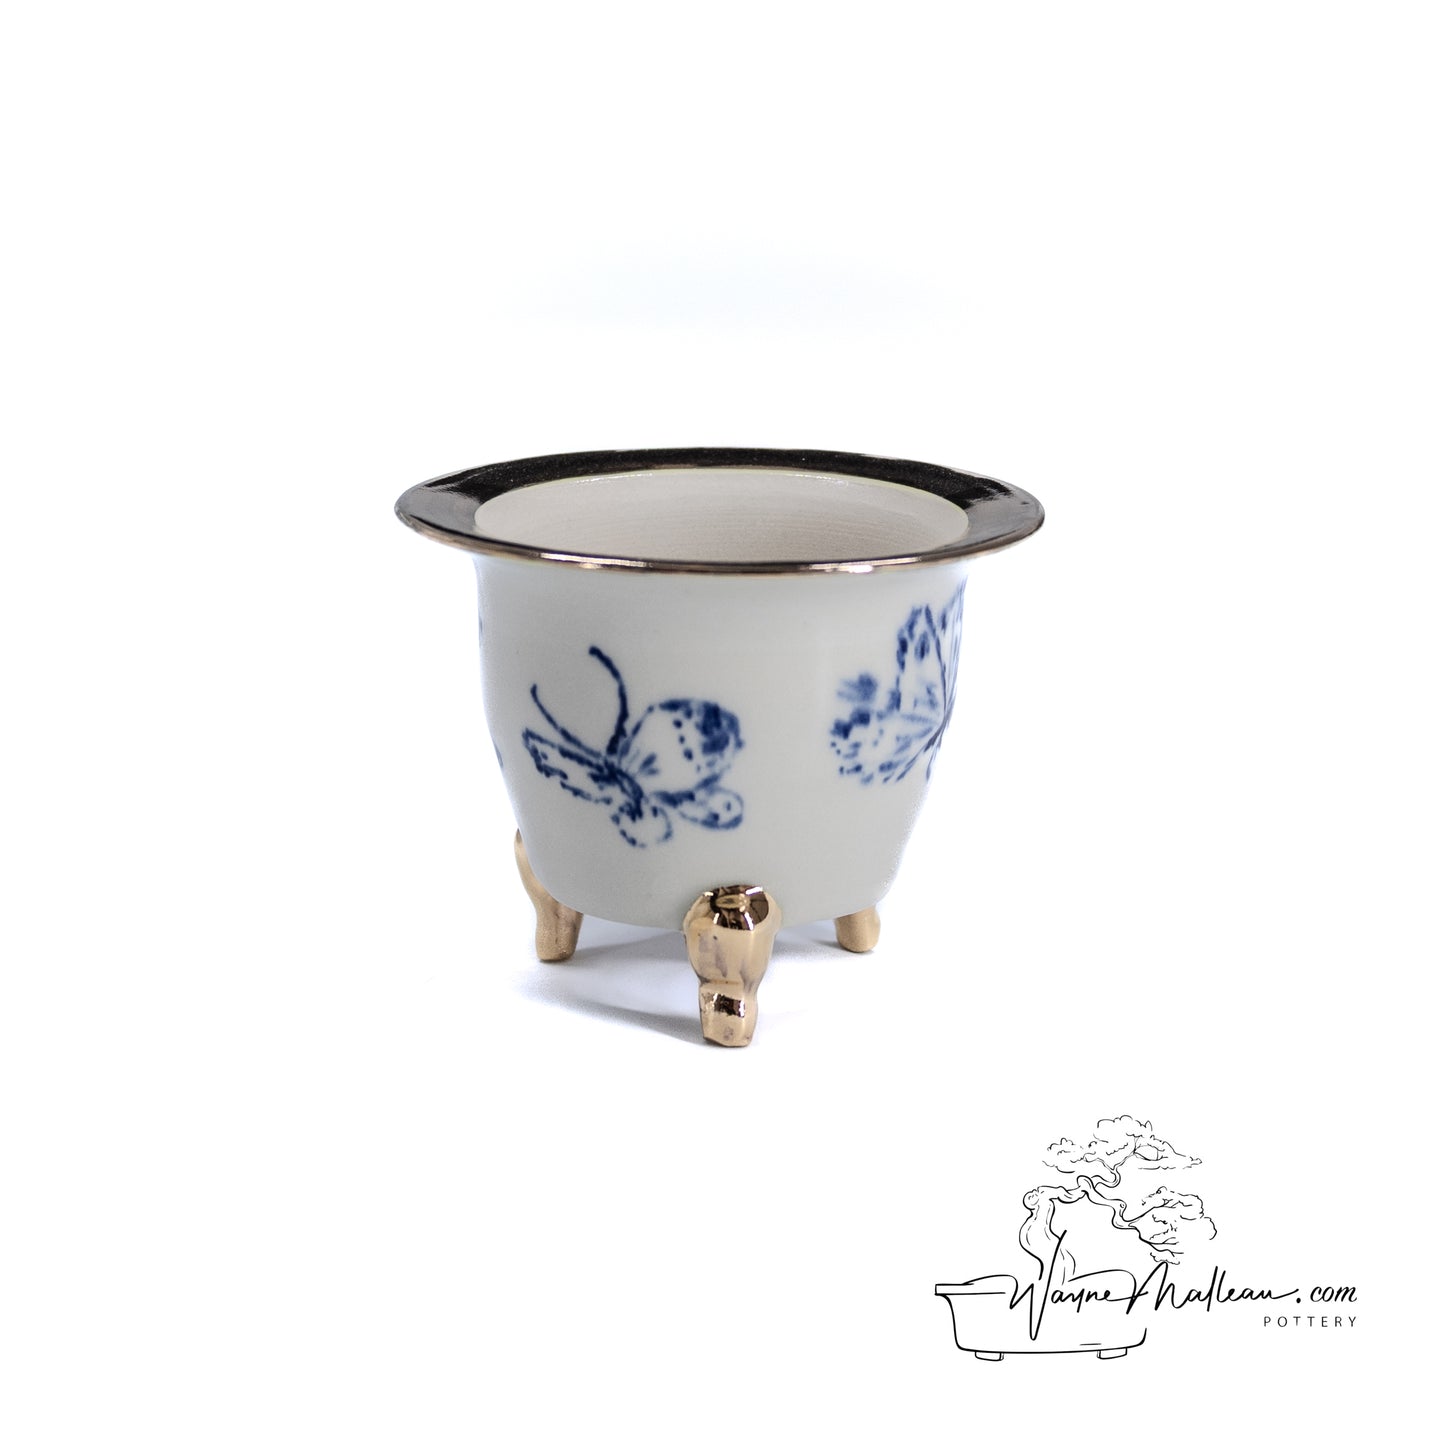 240325175 - royal accented, handpainted neofinetia orchid pot